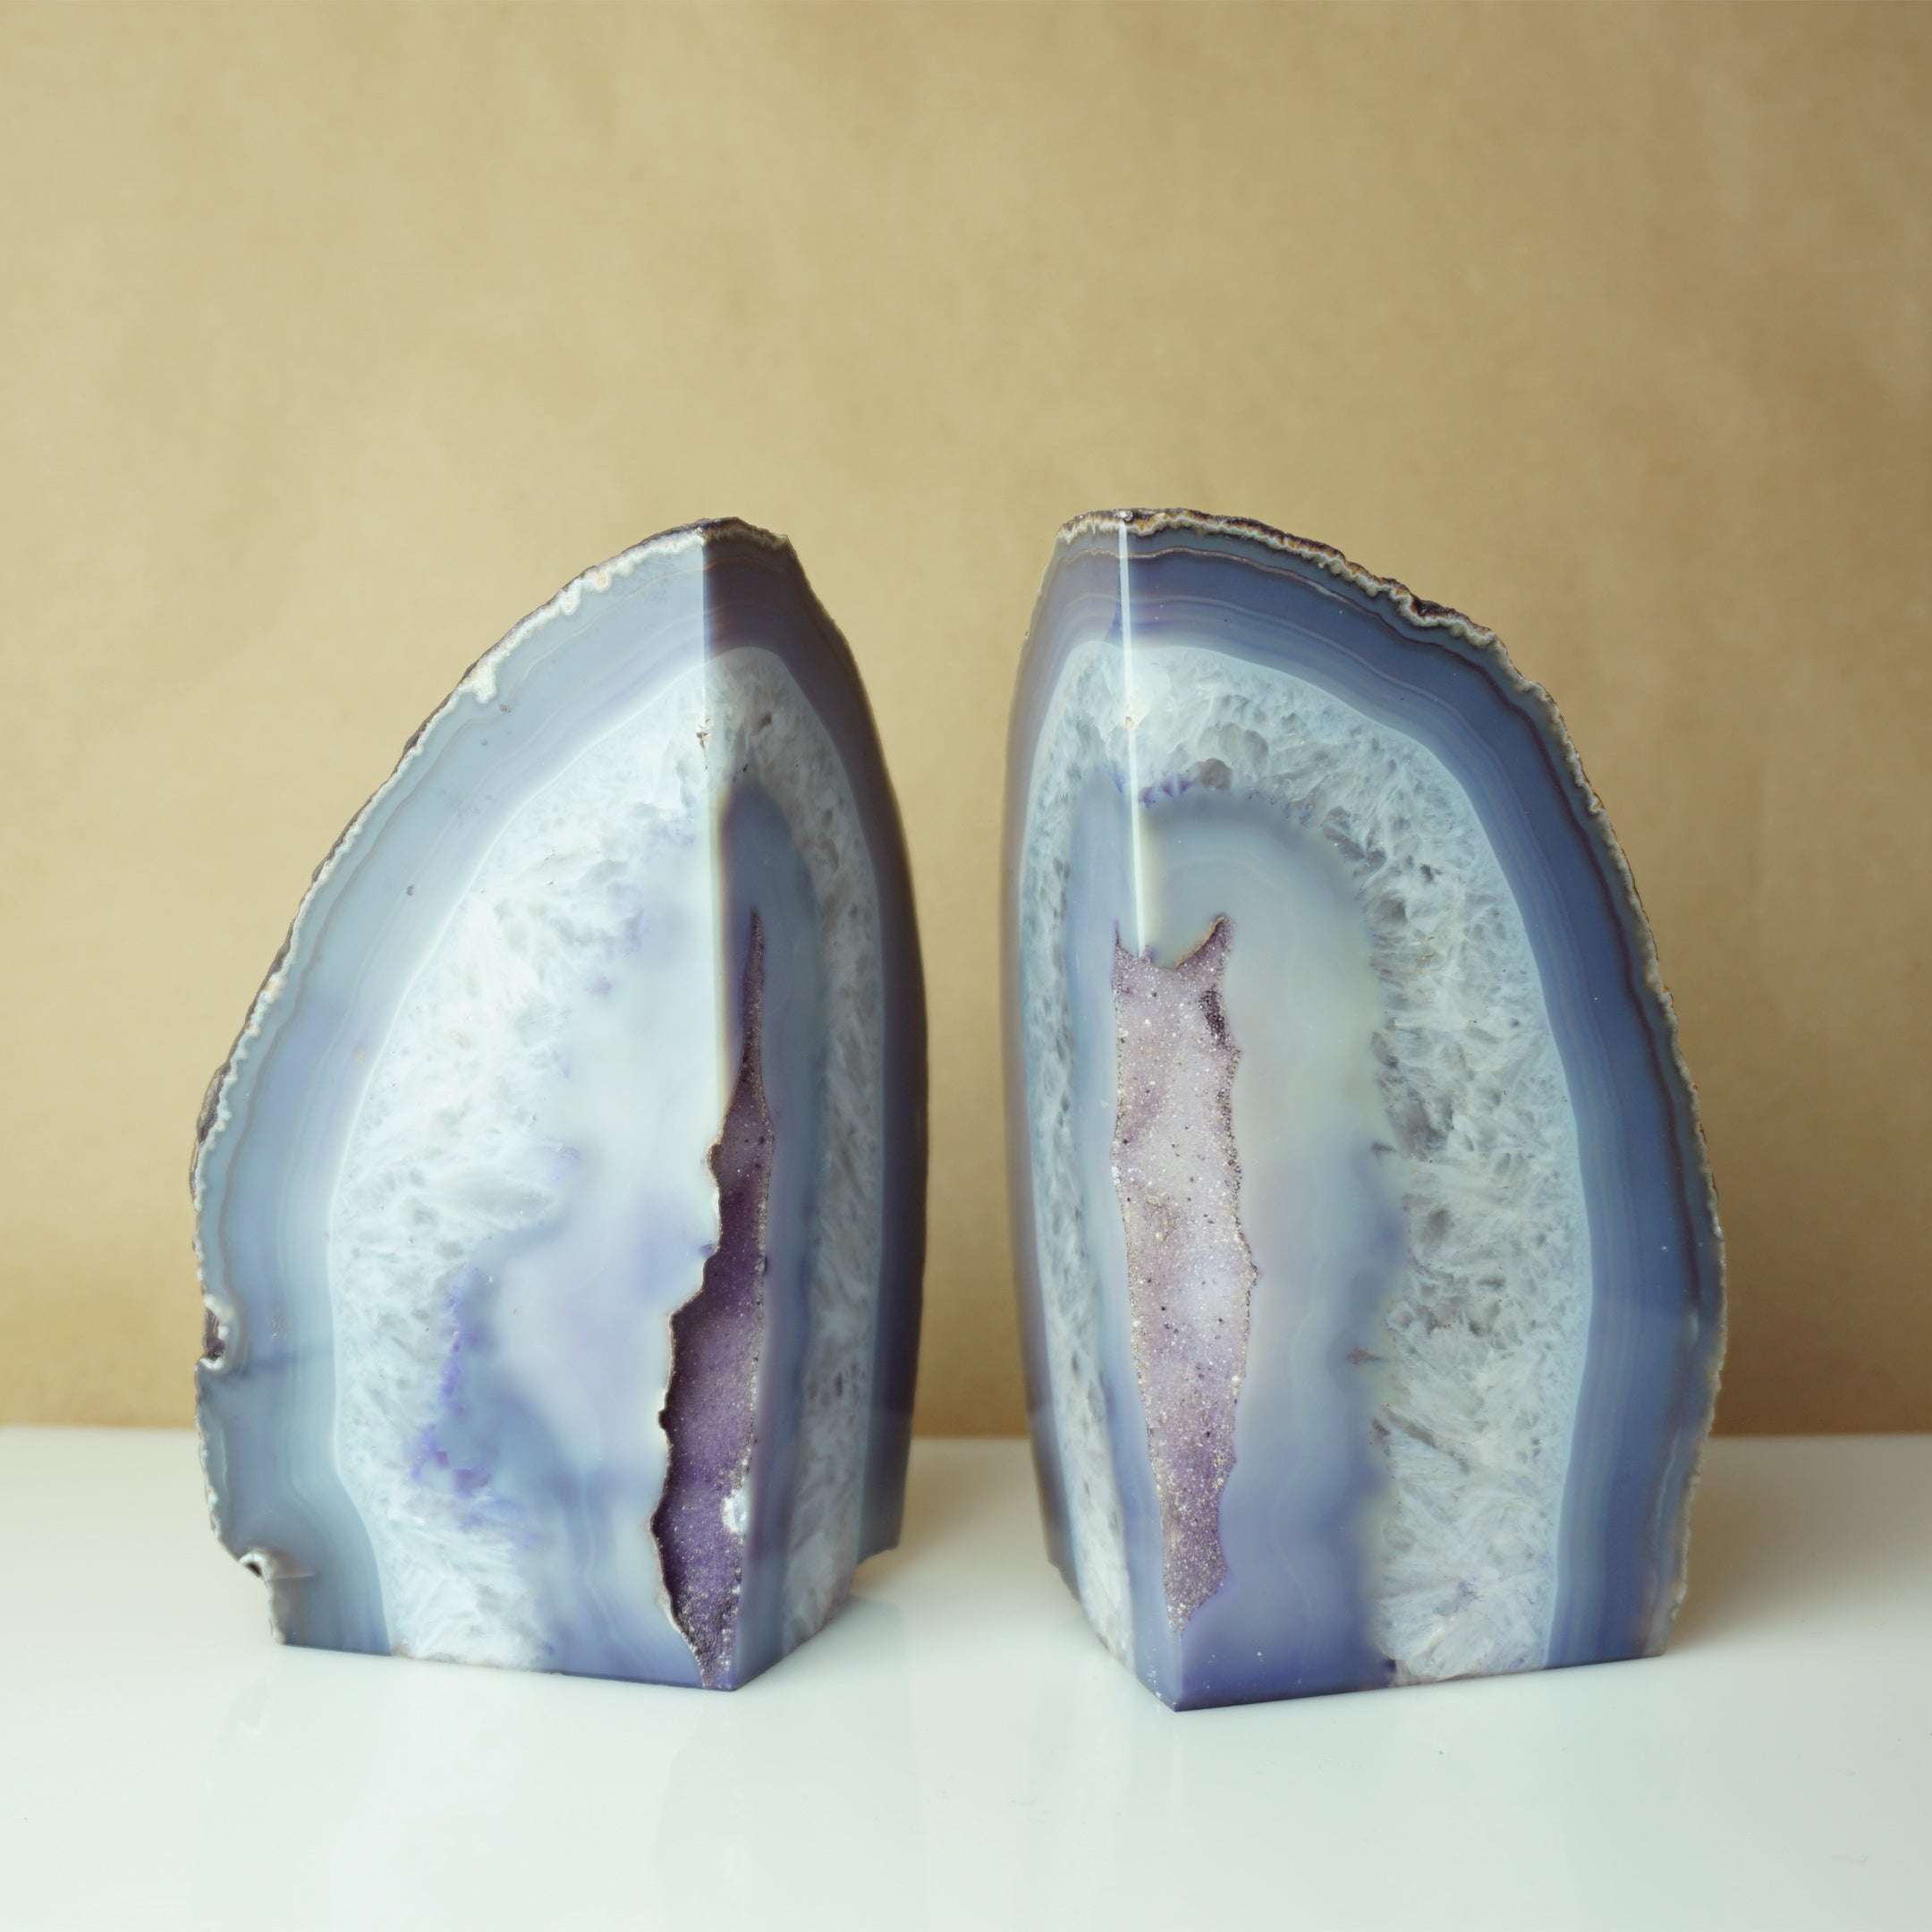 Vintage 5 lbs Unique Natural Polished Violet Agate Bookend Pair. 6" tall Bohemian Decor.